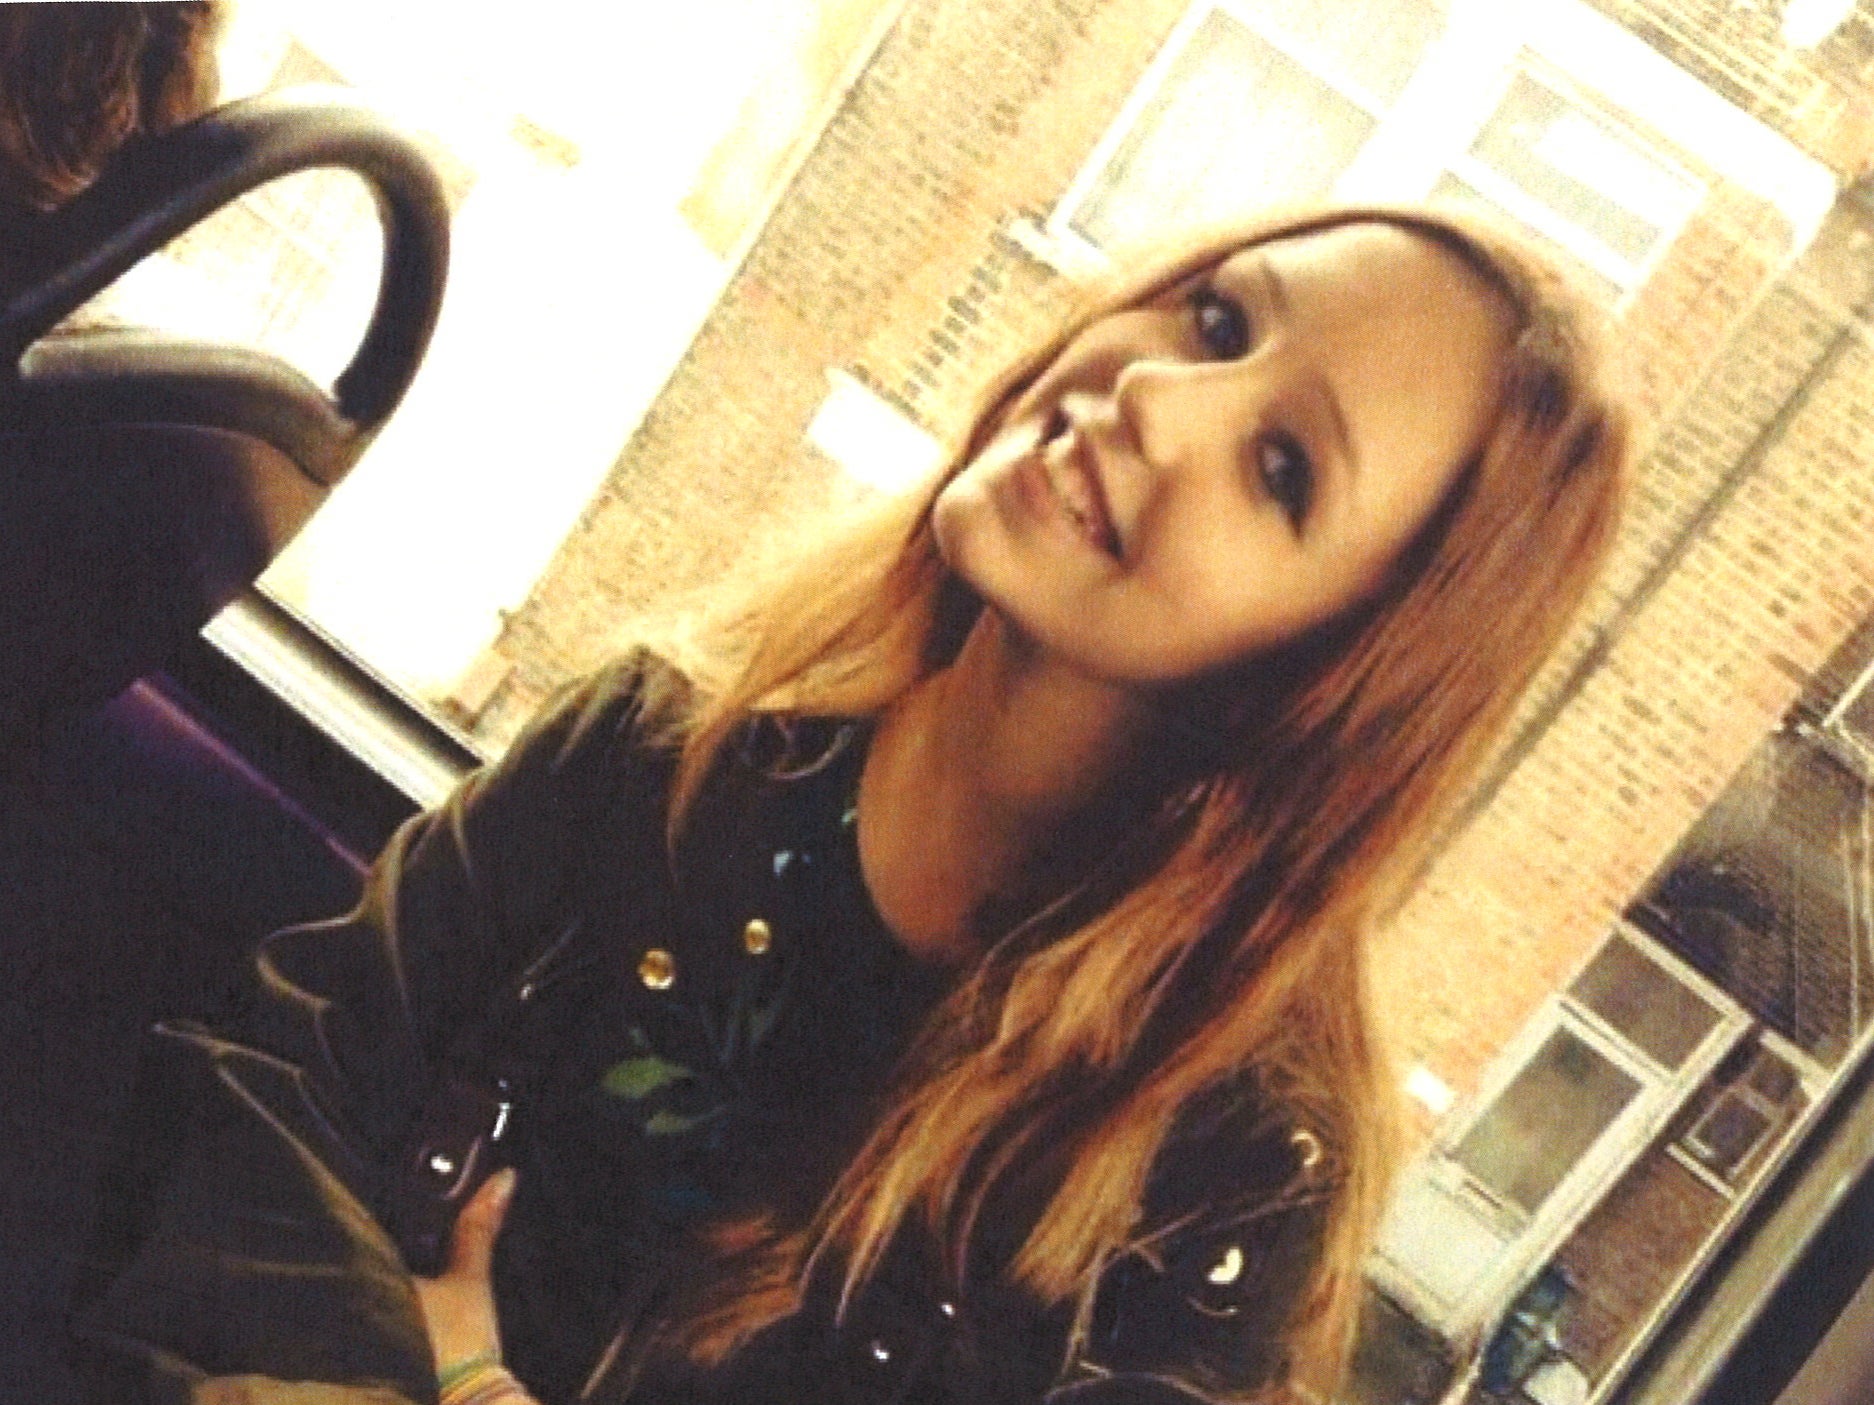 Police are searching for Alice Gross, who went missing in August